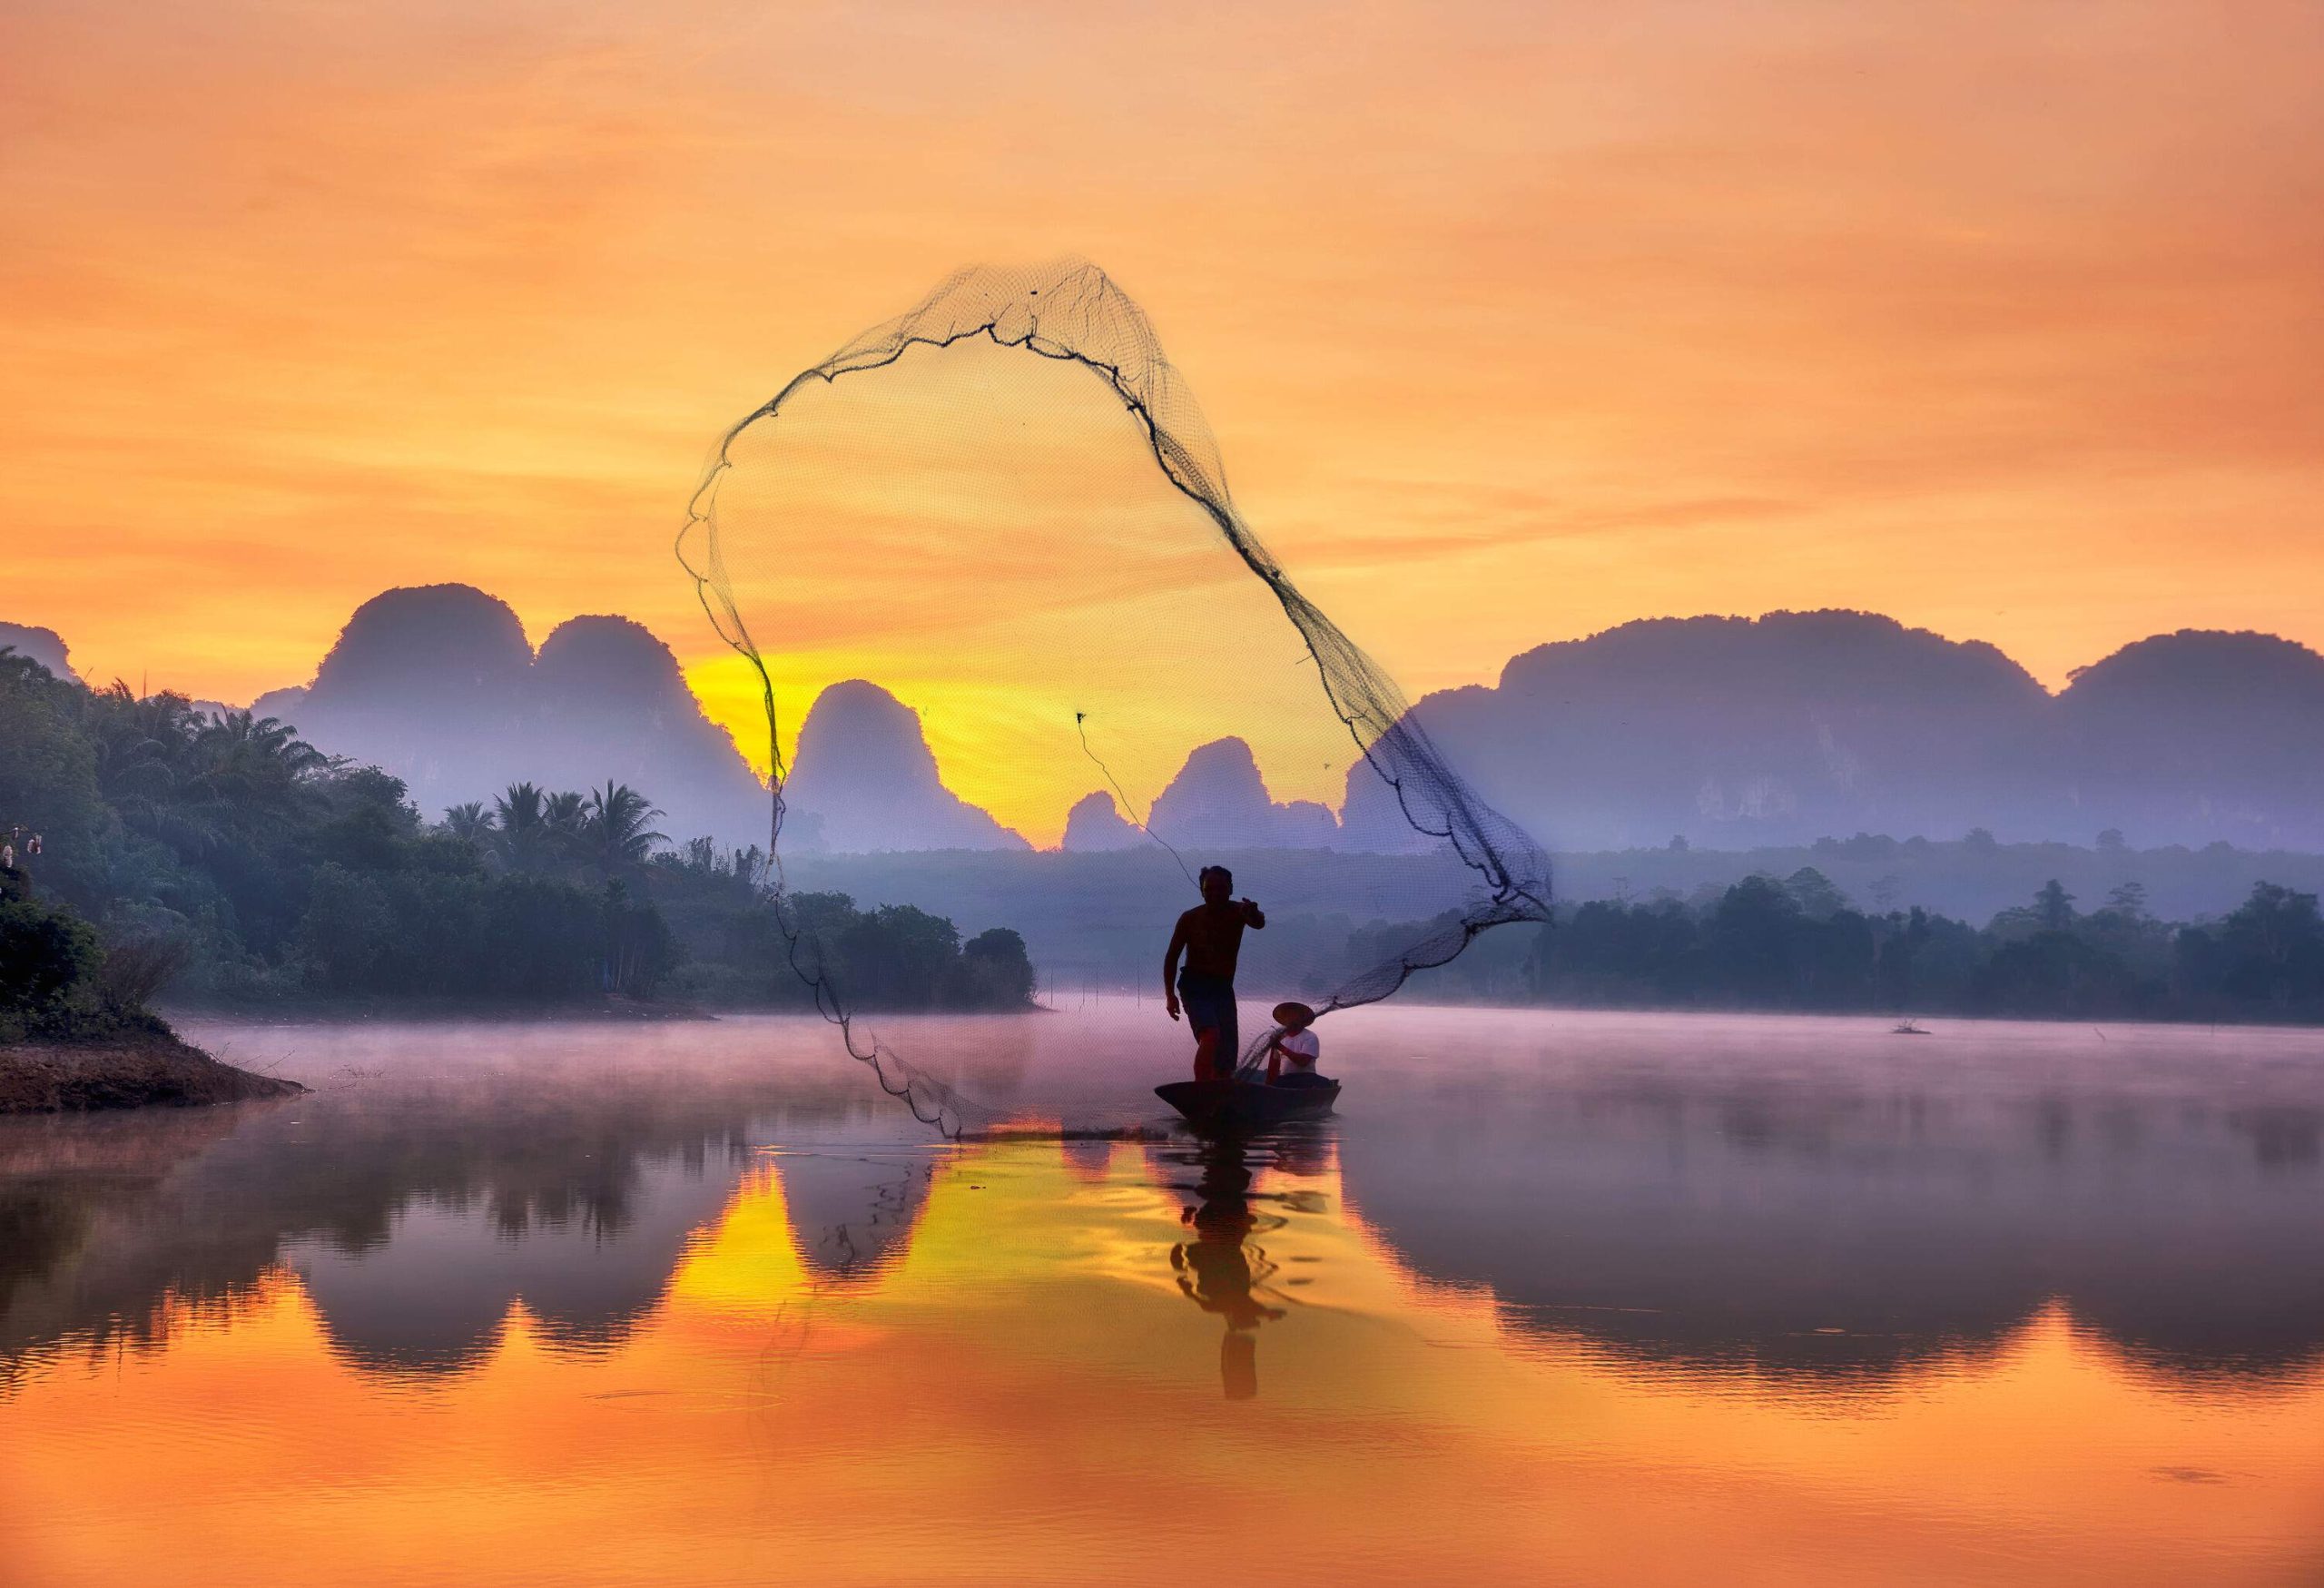 A fisherman on a boat throws a fishing net to a calm river that reflects the surrounding misty mountains and orange skies.